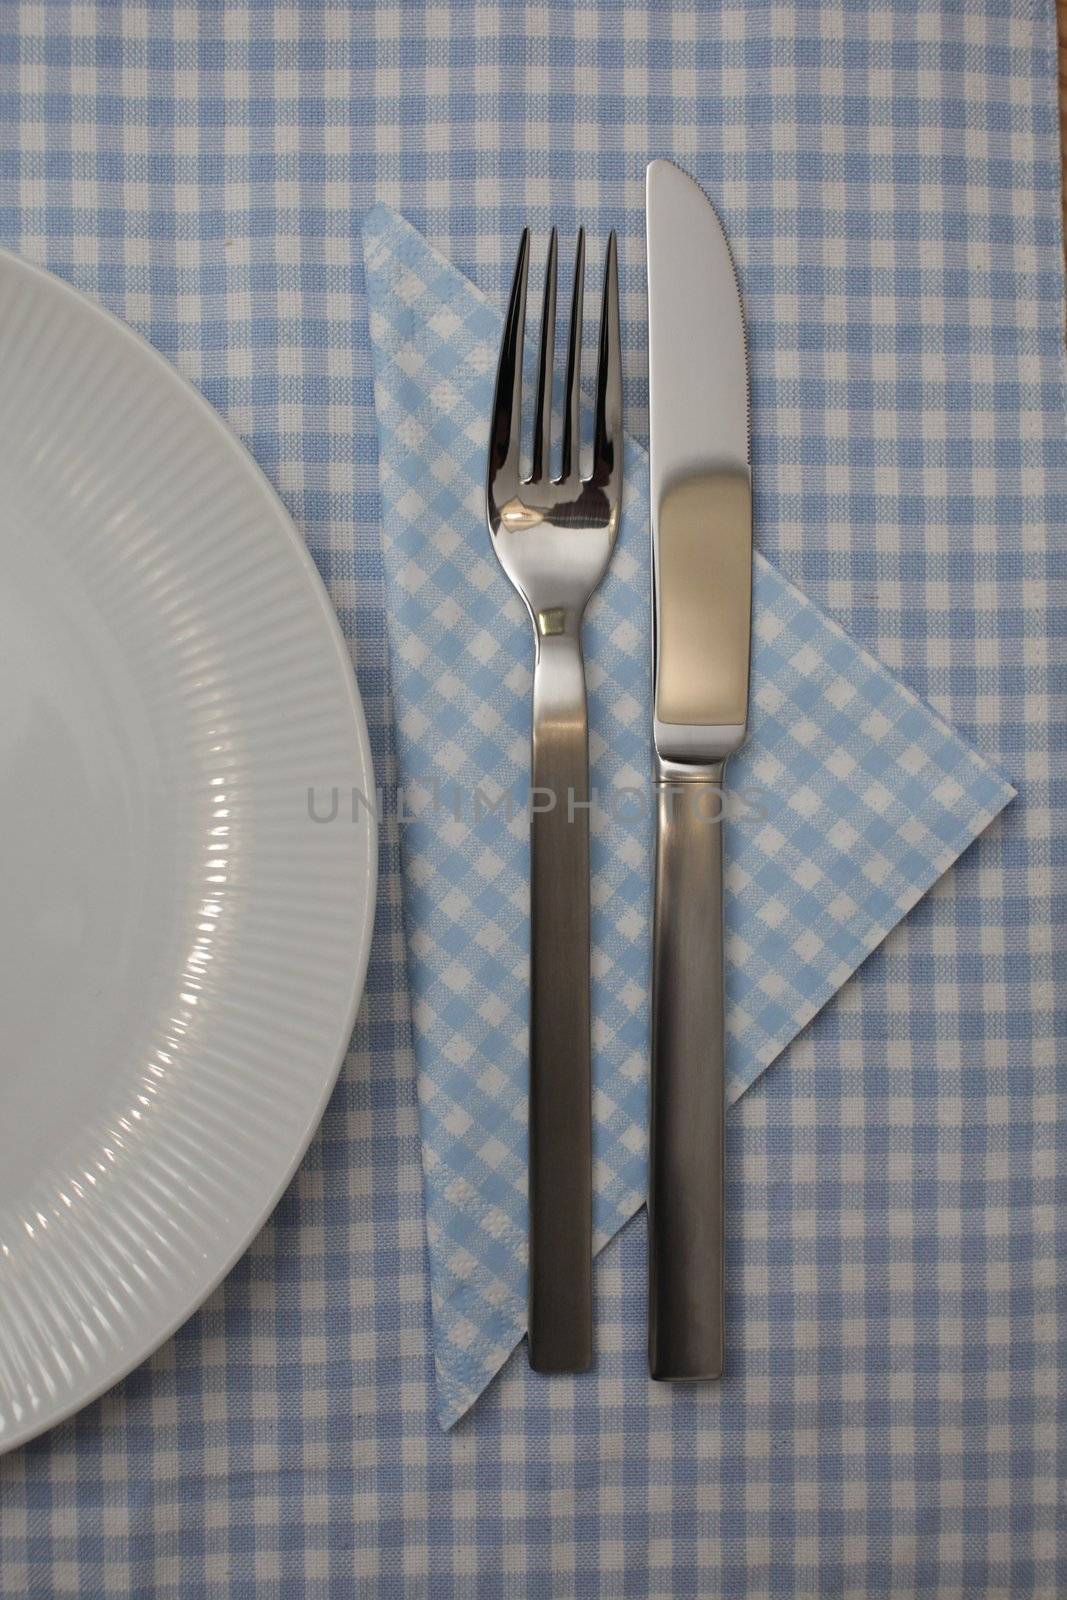 knife fork and a white plate on a wooden background